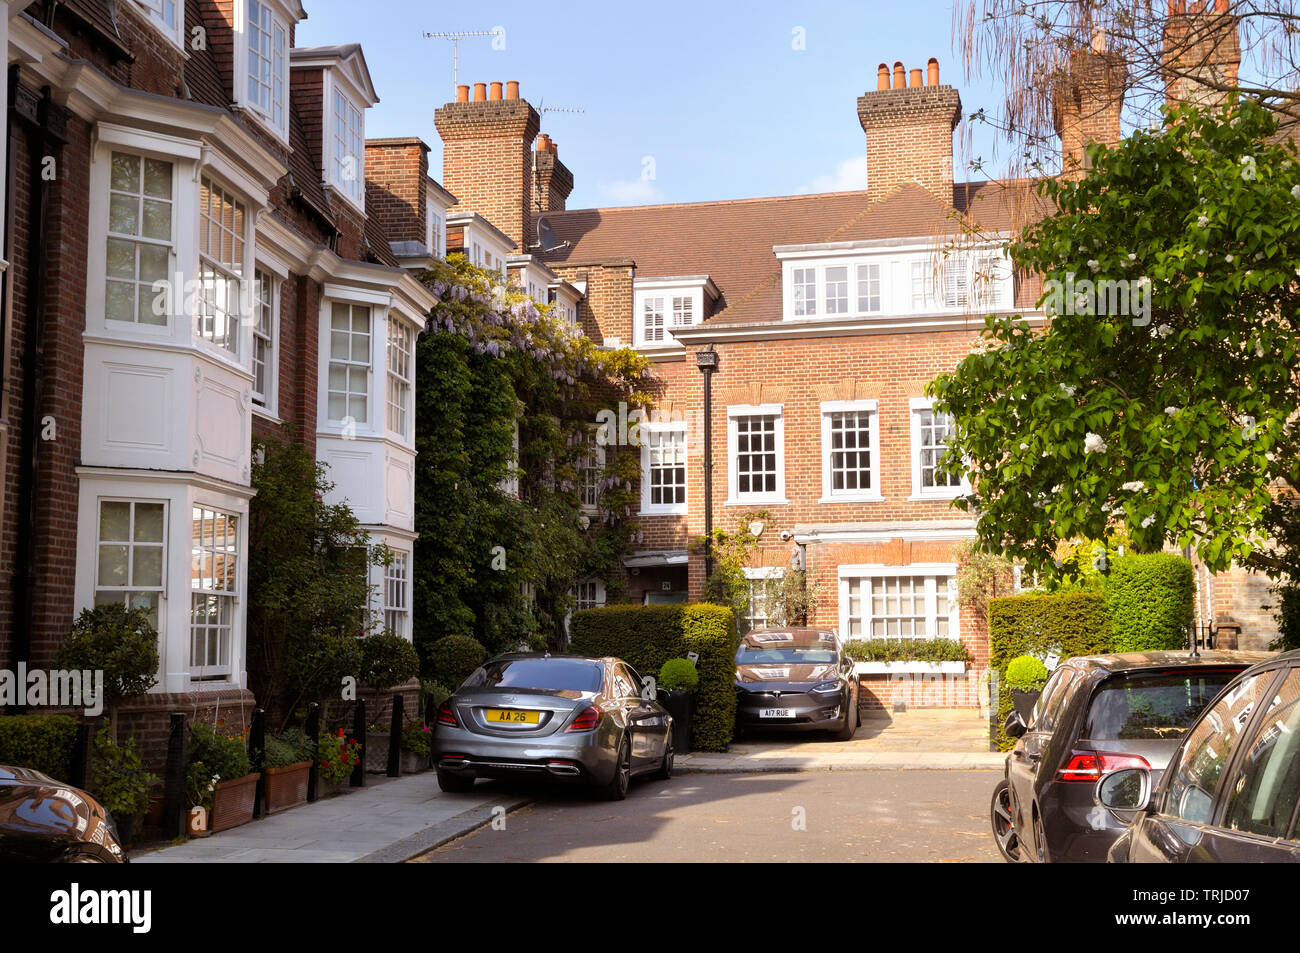 Chelsea Park Gardens is a post WWI development of Arts and Crafts style houses inspired by the Garden Suburb movement , Chelsea, London, England, UK Stock Photo